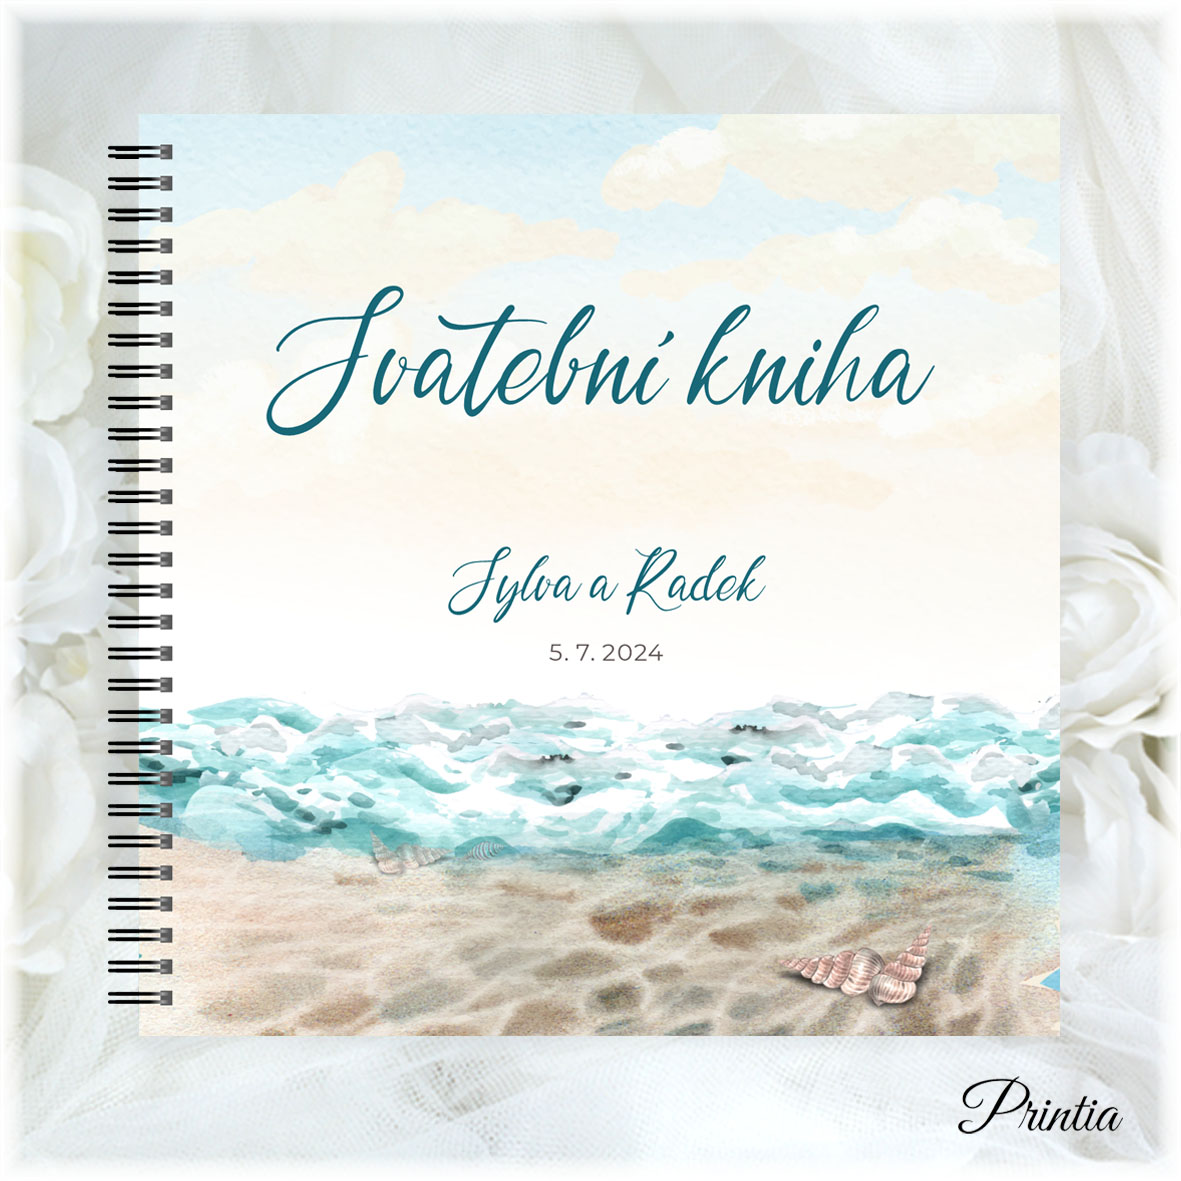 Wedding book with a sea and sand theme